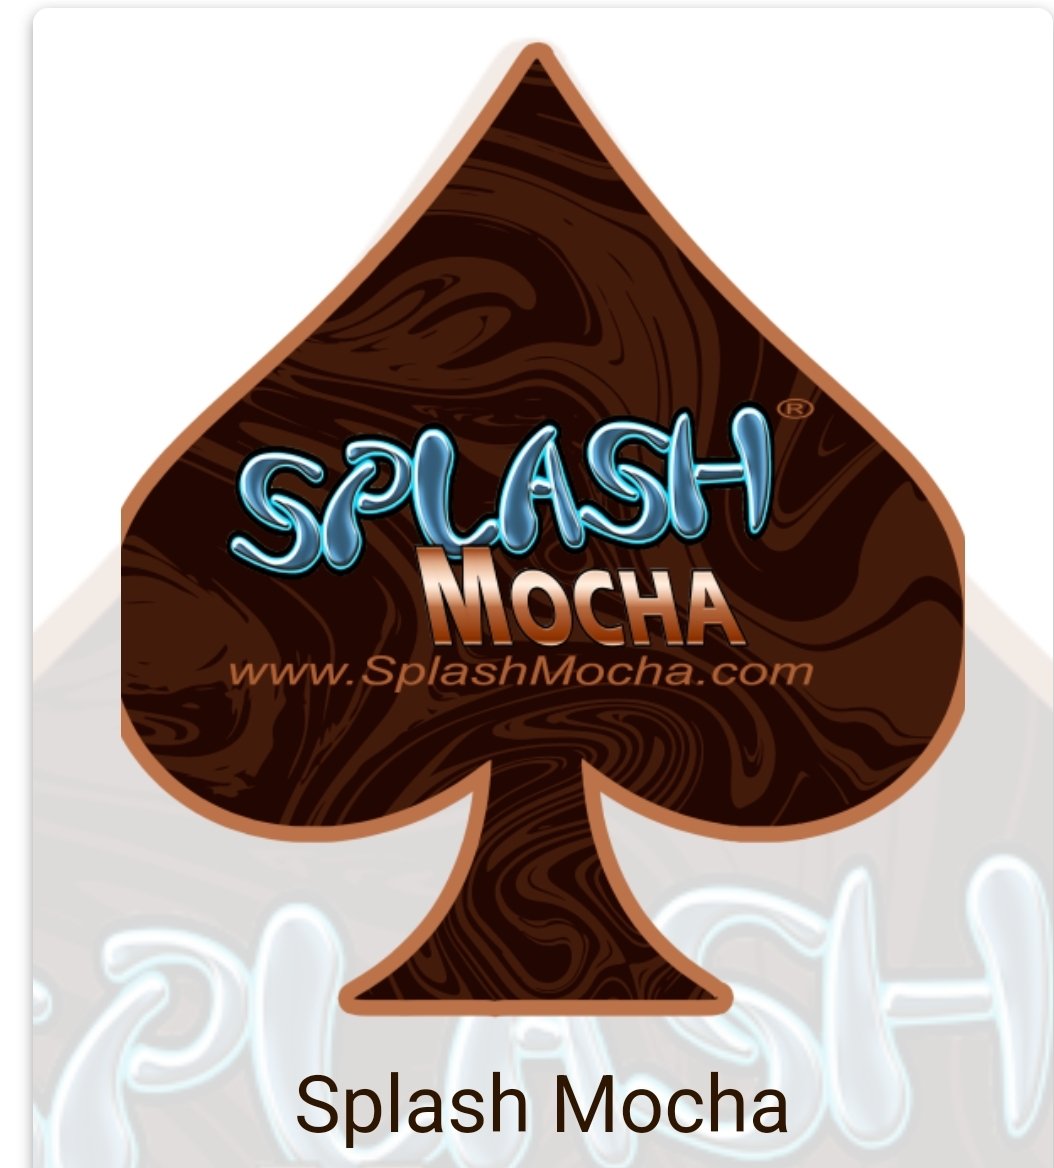 Bulls looking for Hotwives,Cuckold and Milf Hotwives and Cuckold looking for Quality Bulls and Safe Place for Hot Interracial Convention. Feel free to checkout Splashmocha.com thank me later.